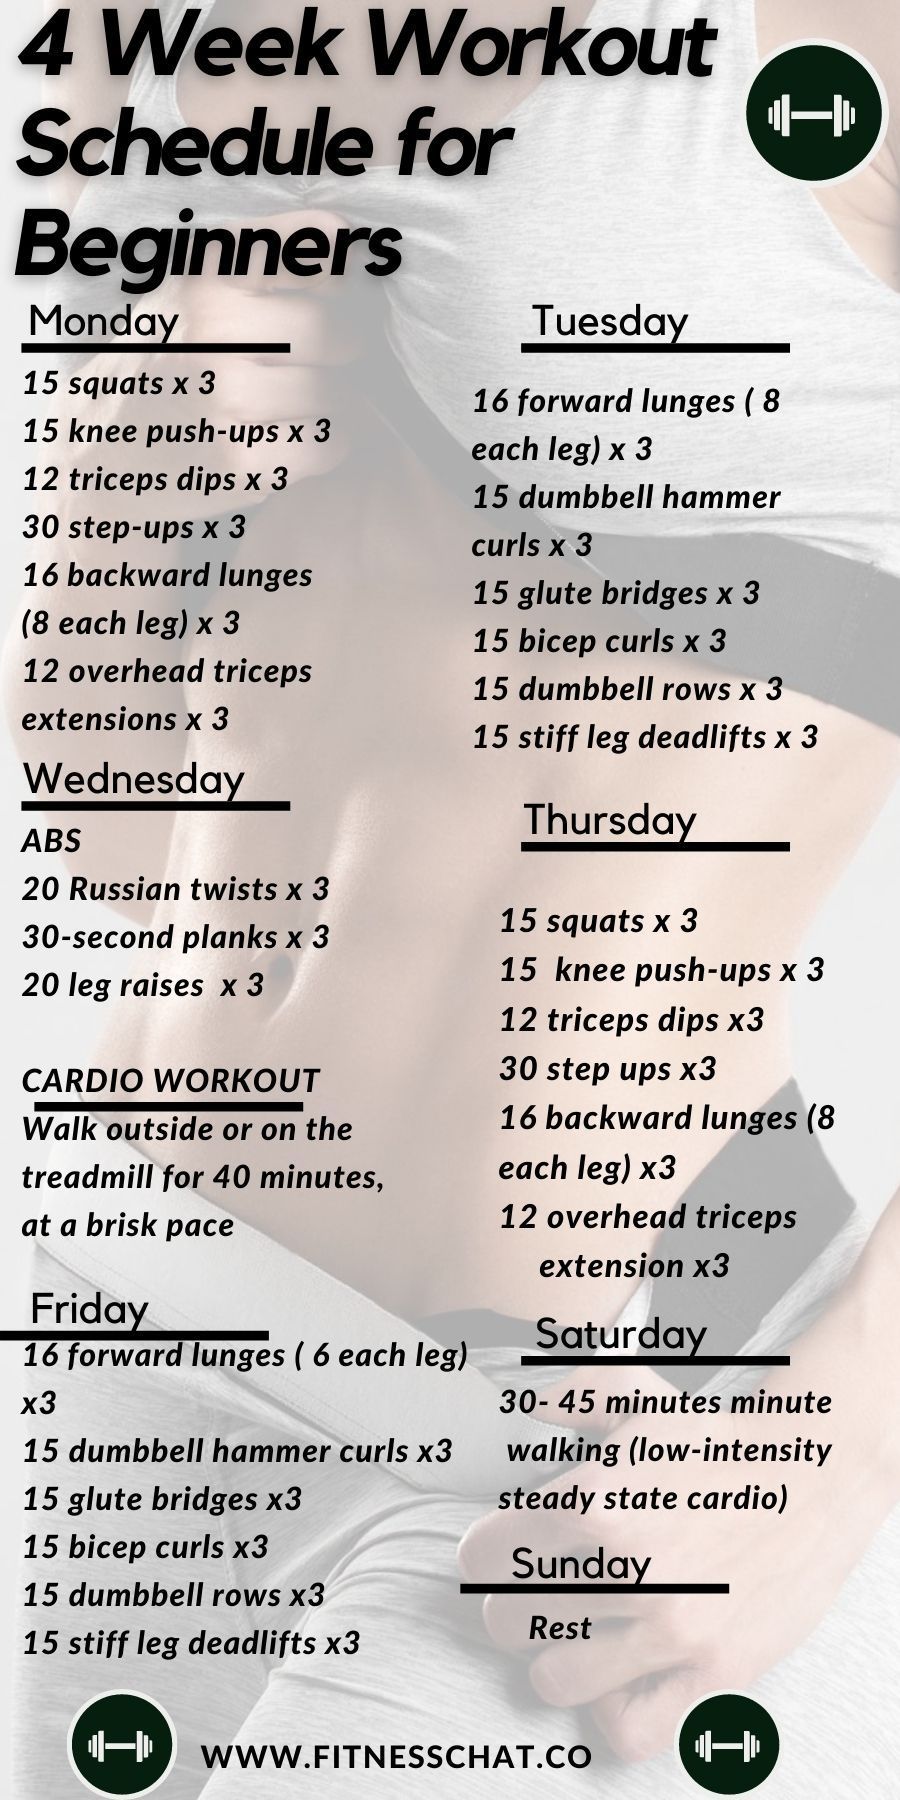 weight loss plans -   18 workouts at home for beginners ideas